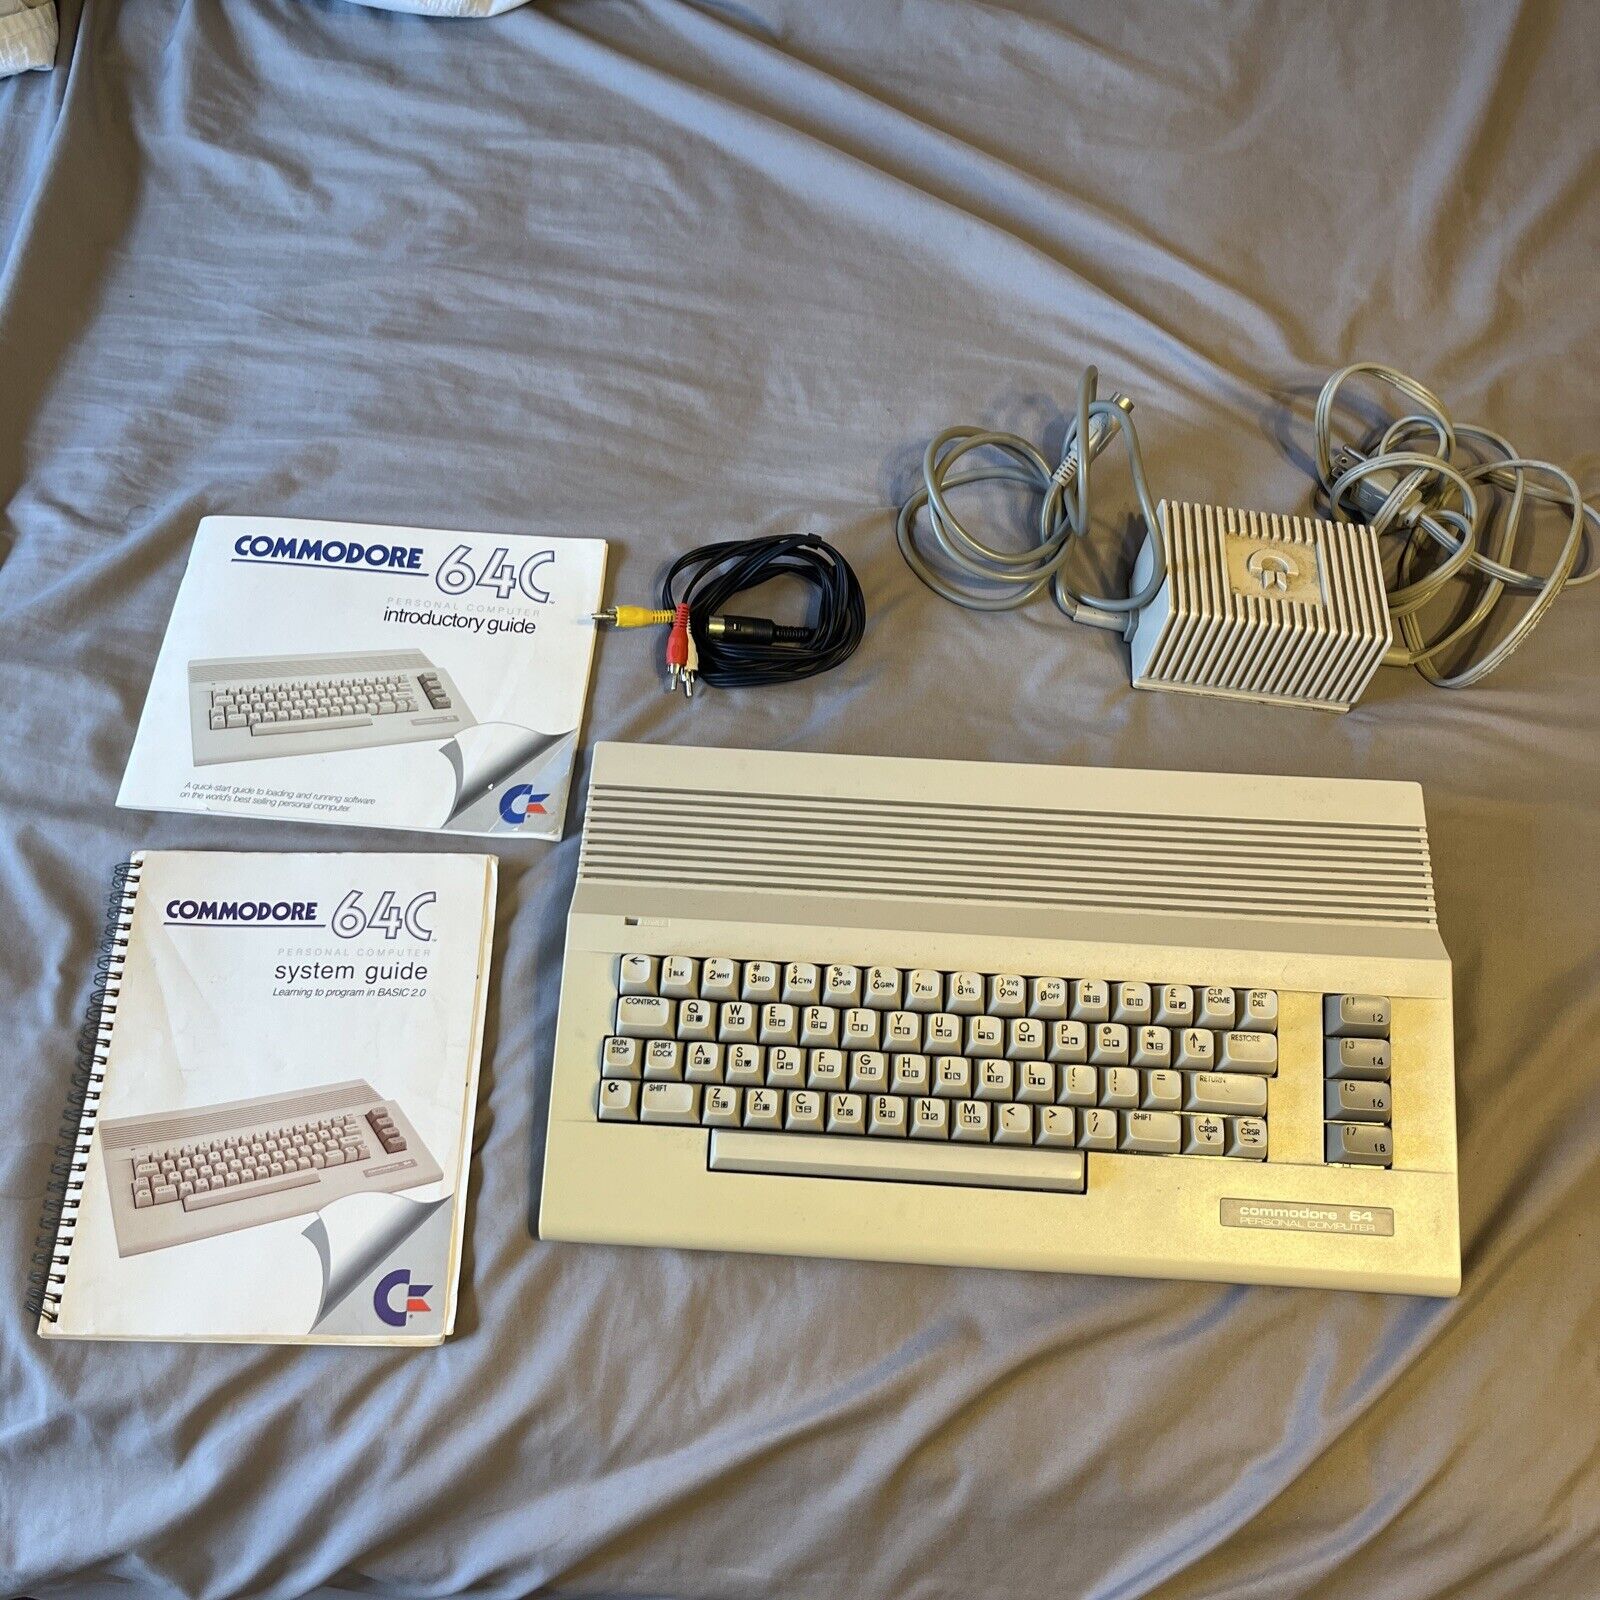 “Commodore 64 C”Computer  (Includes Power Supply, AV cables, Manual) WORKING